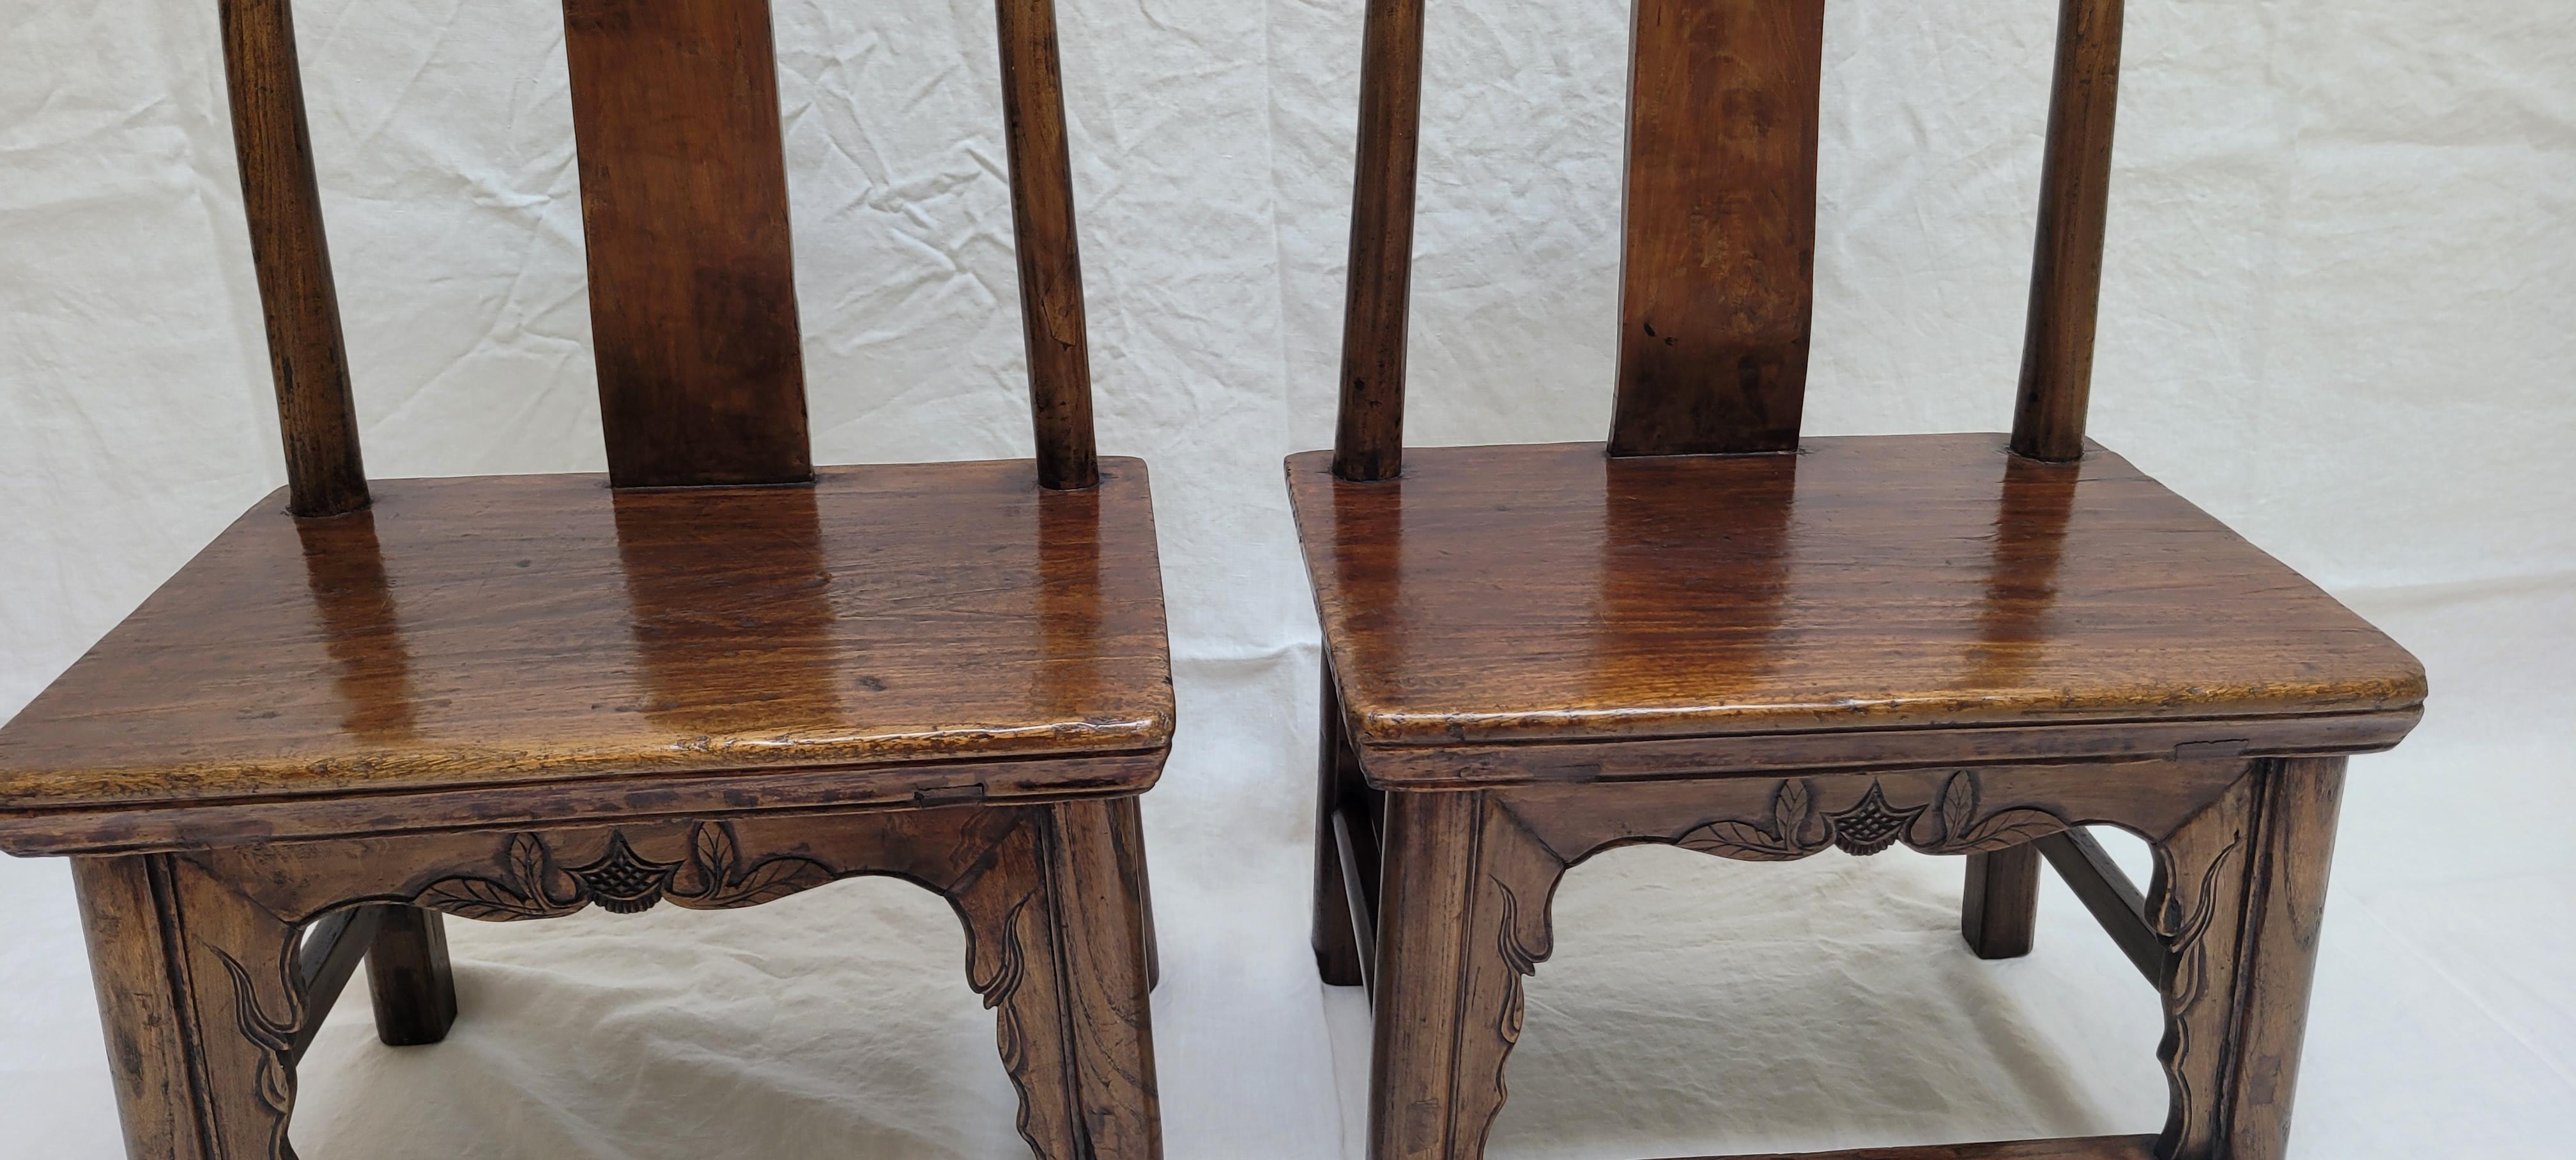 19th Century Pair of Children's Chairs For Sale 2